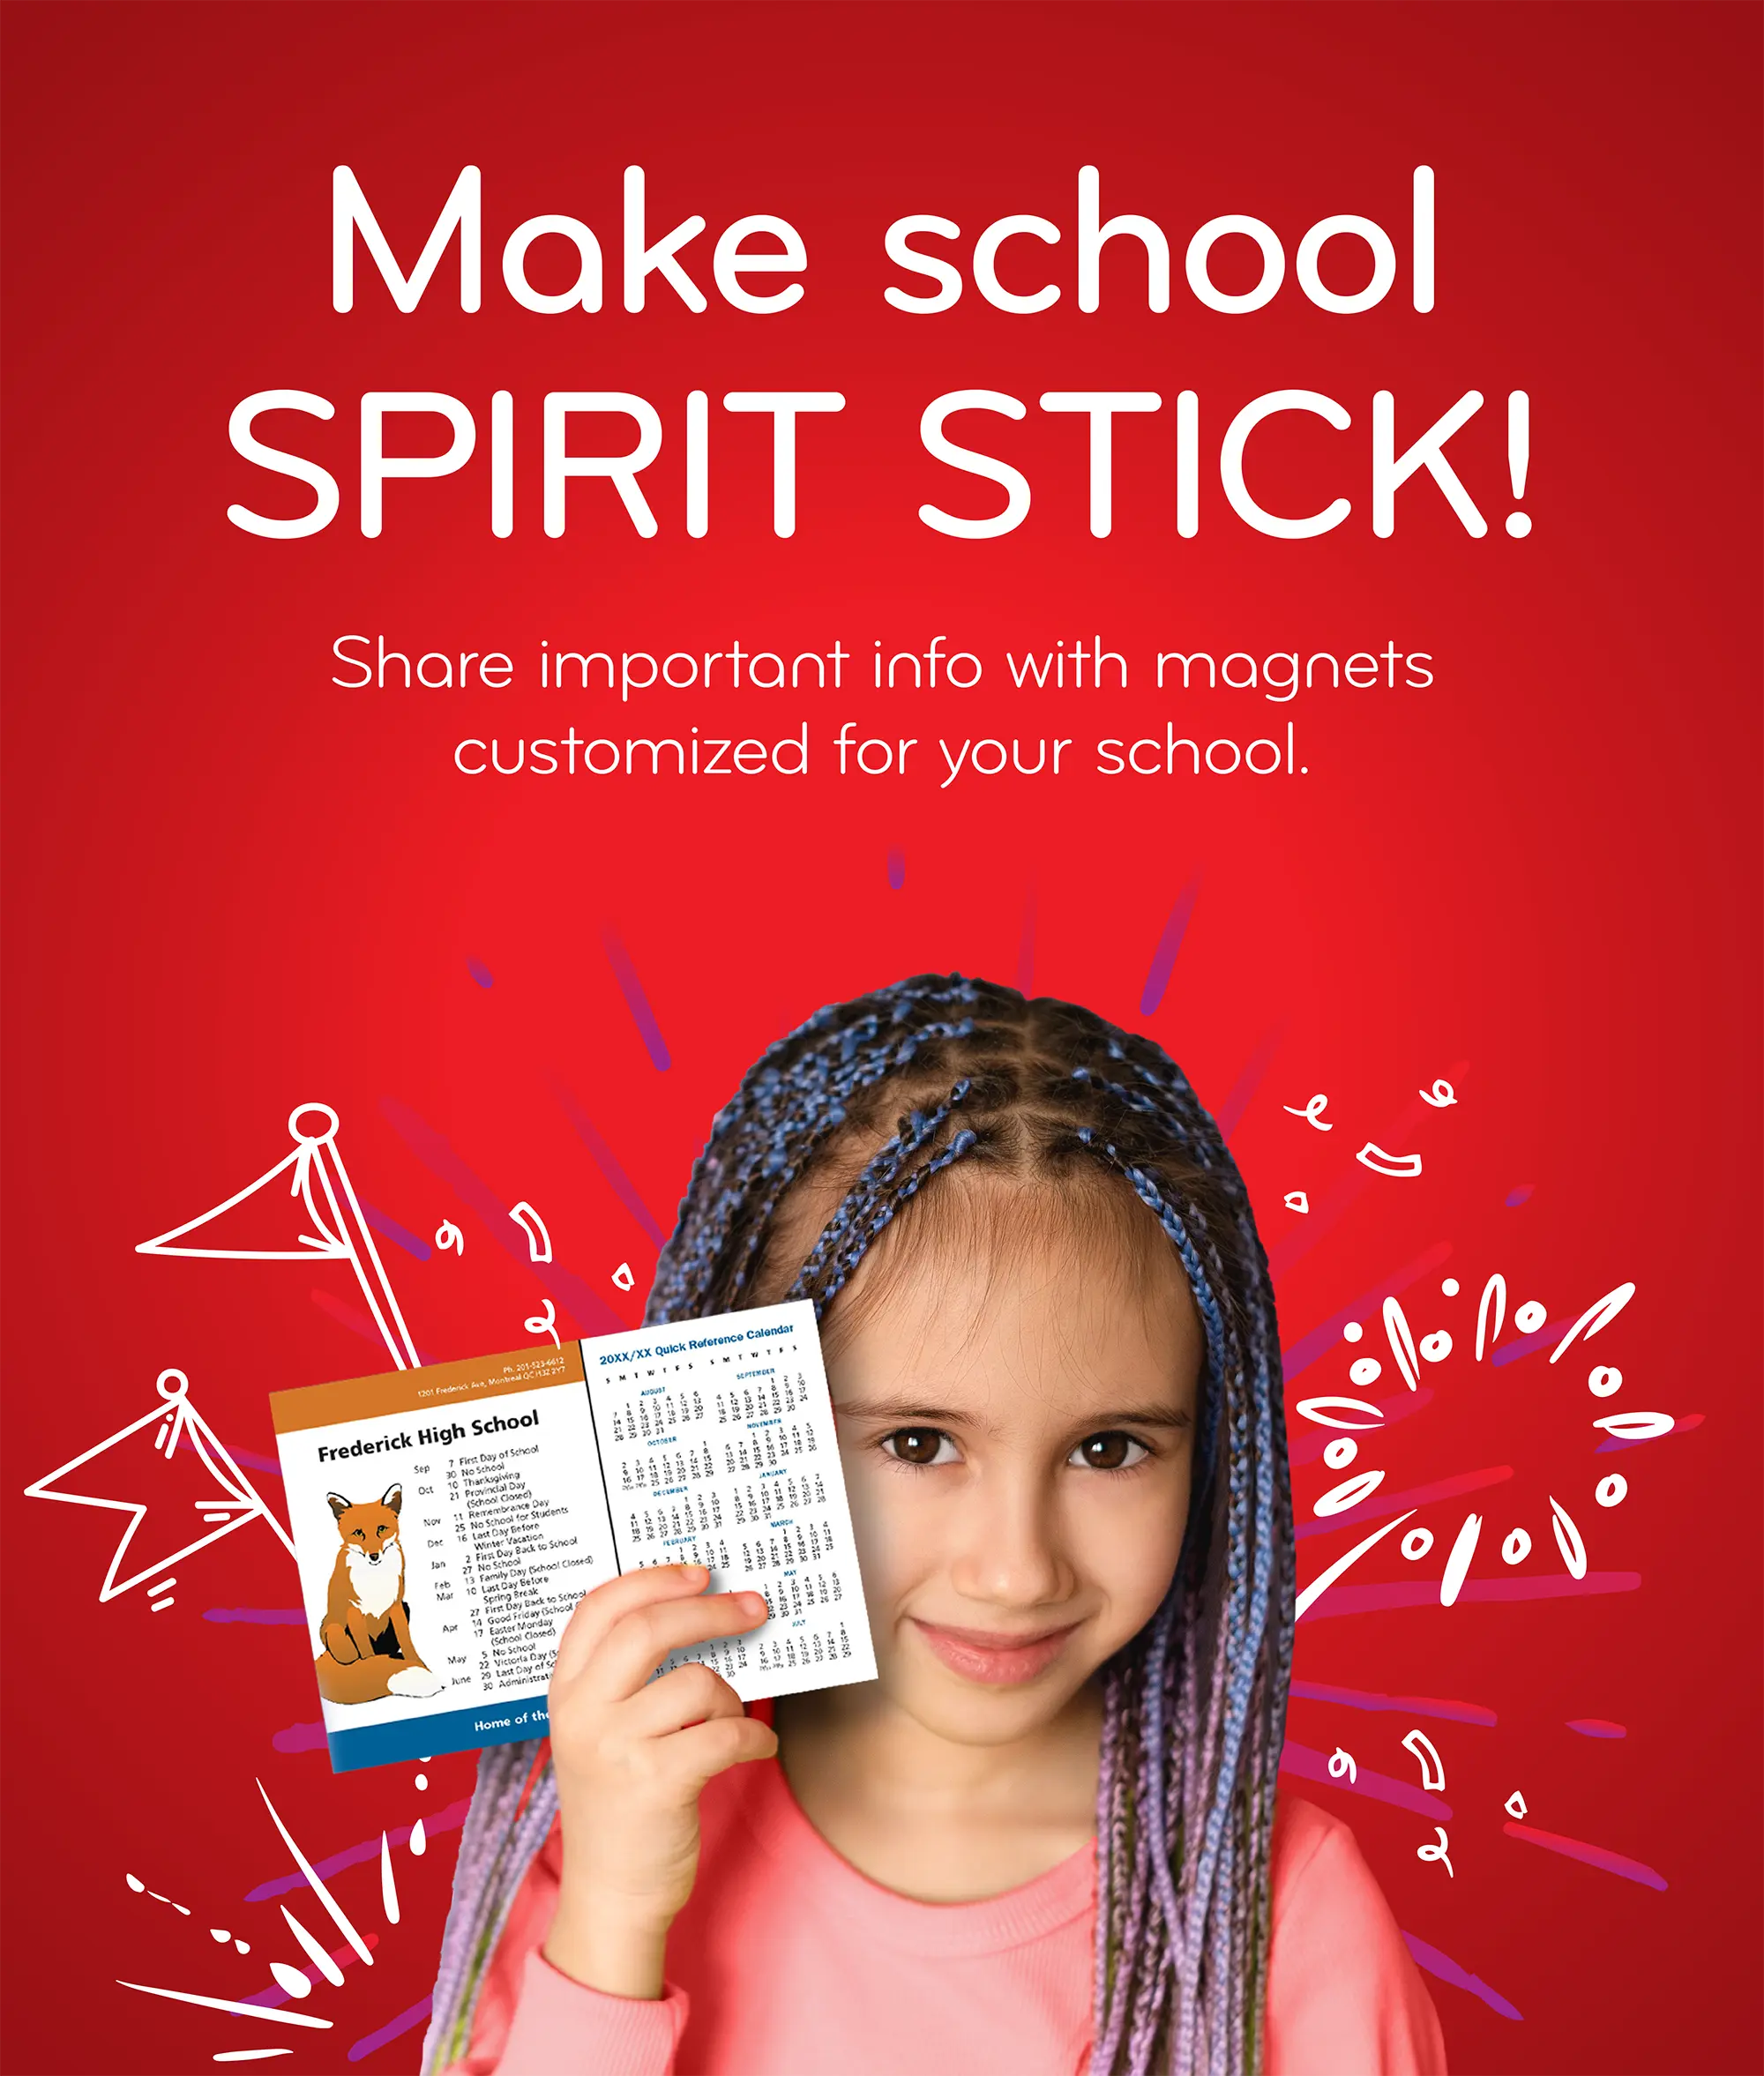 Make school SPIRIT STICK! Share important info with magnets customized for your school.